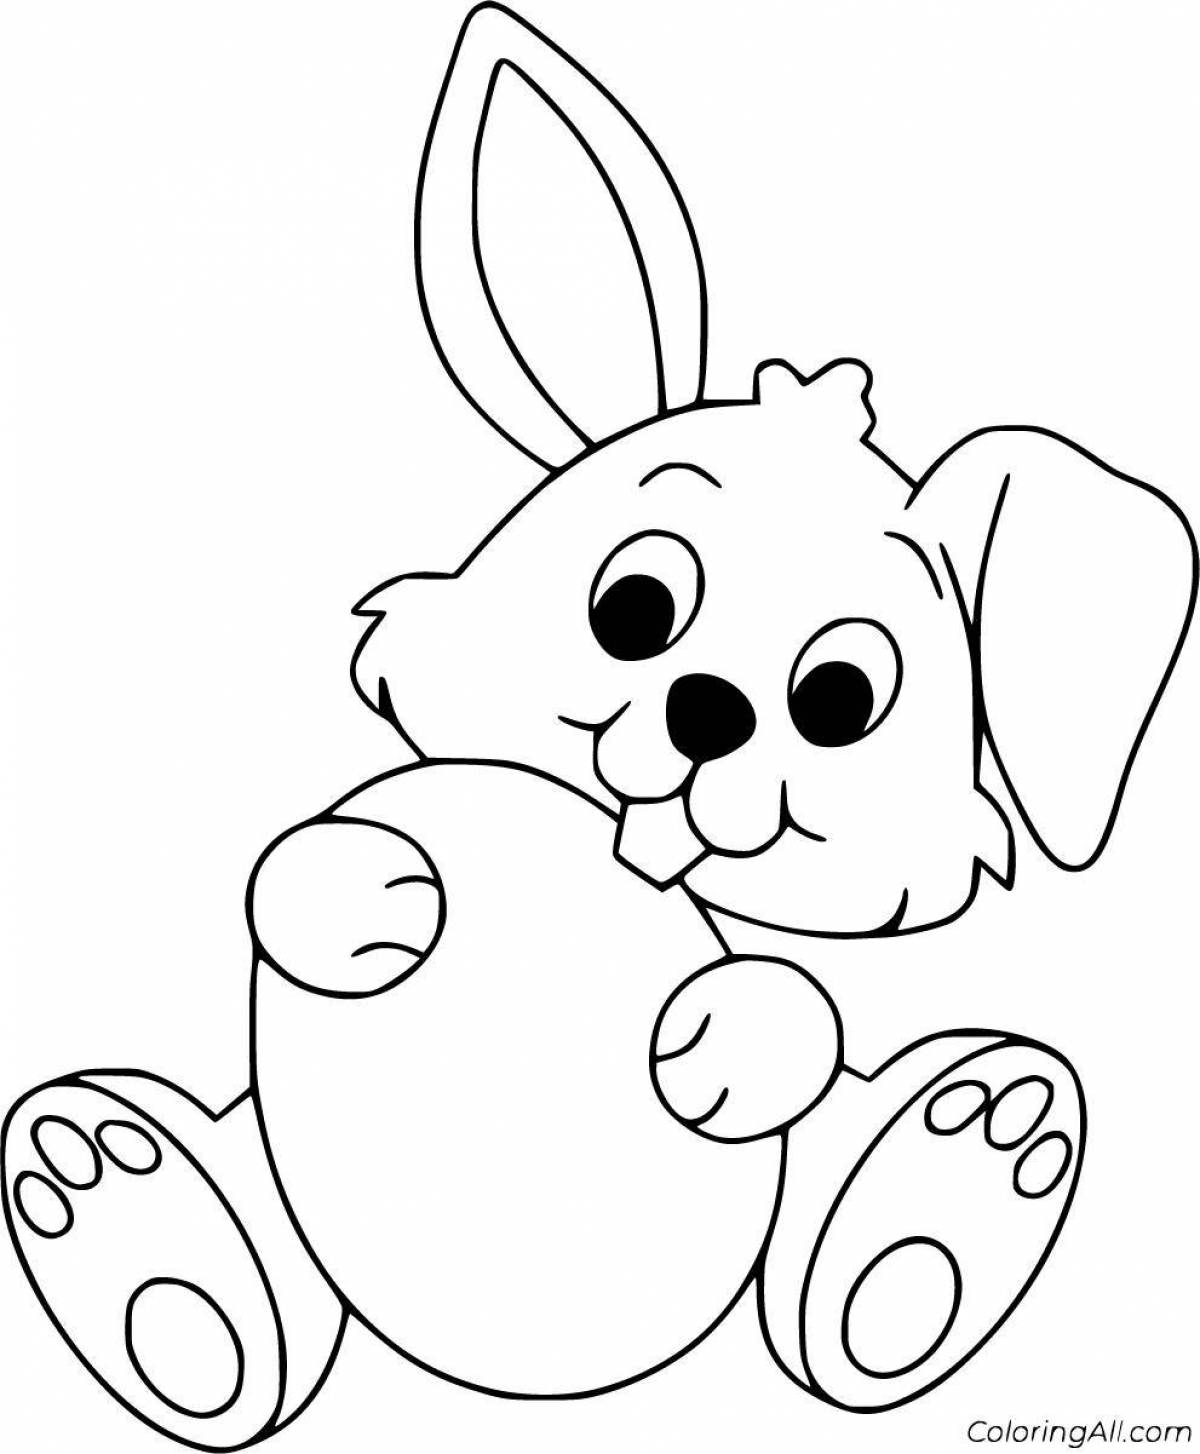 Cute bunny coloring with heart